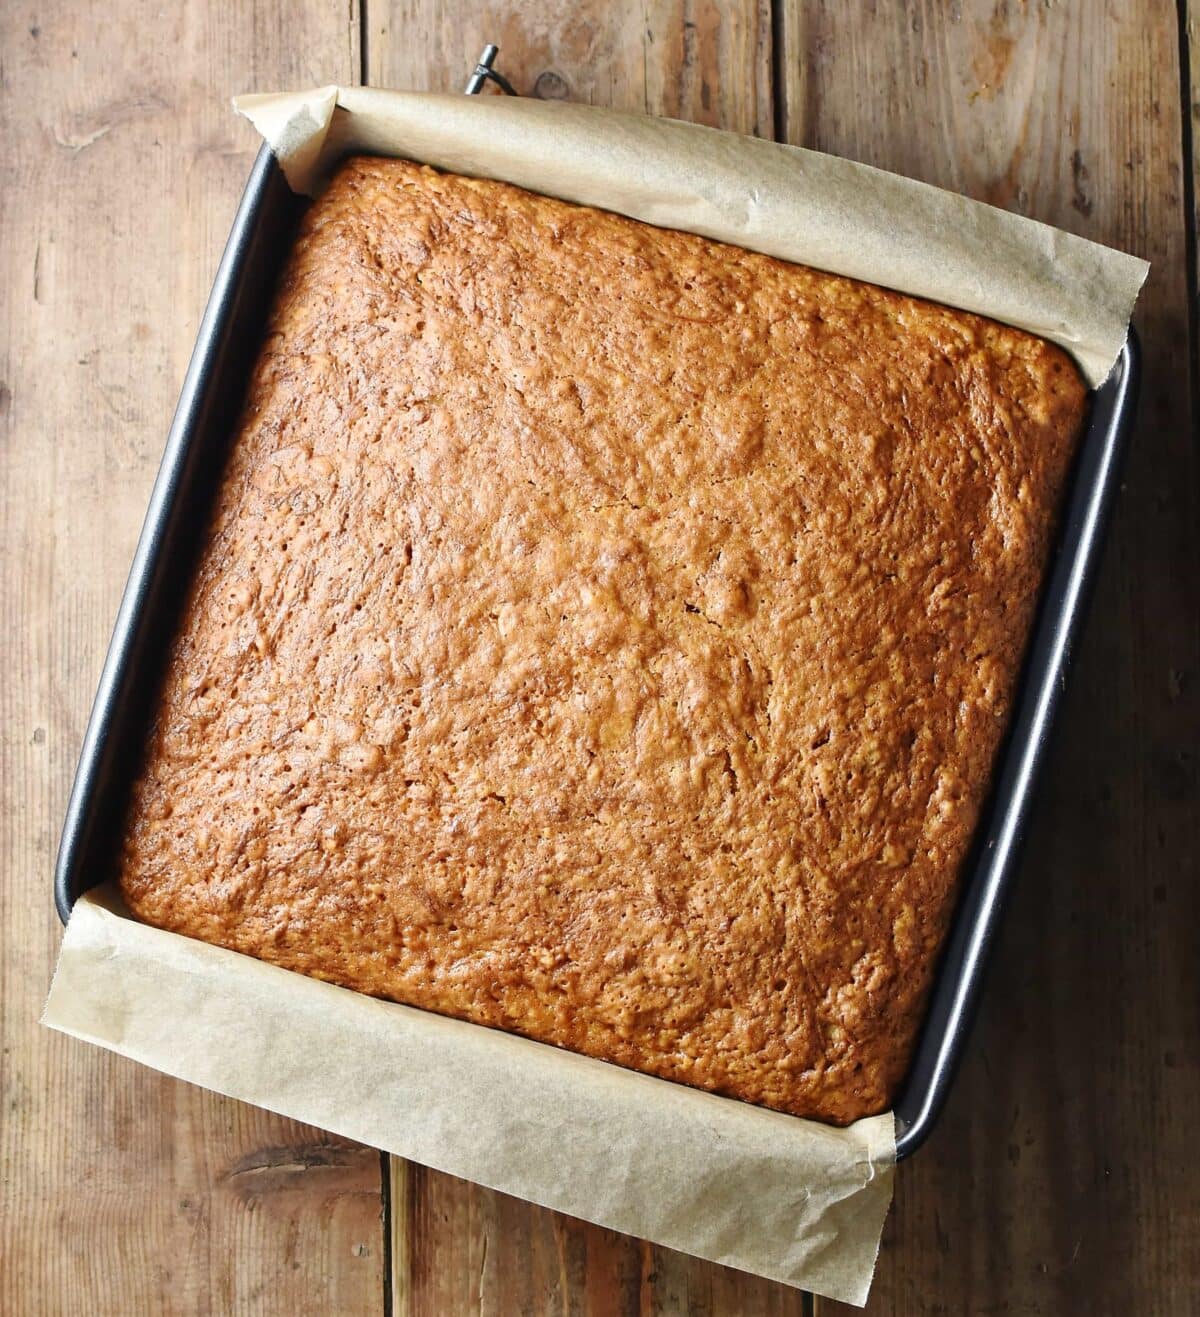 Baked healthy pumpkin cake in square pan with parchment paper visible.